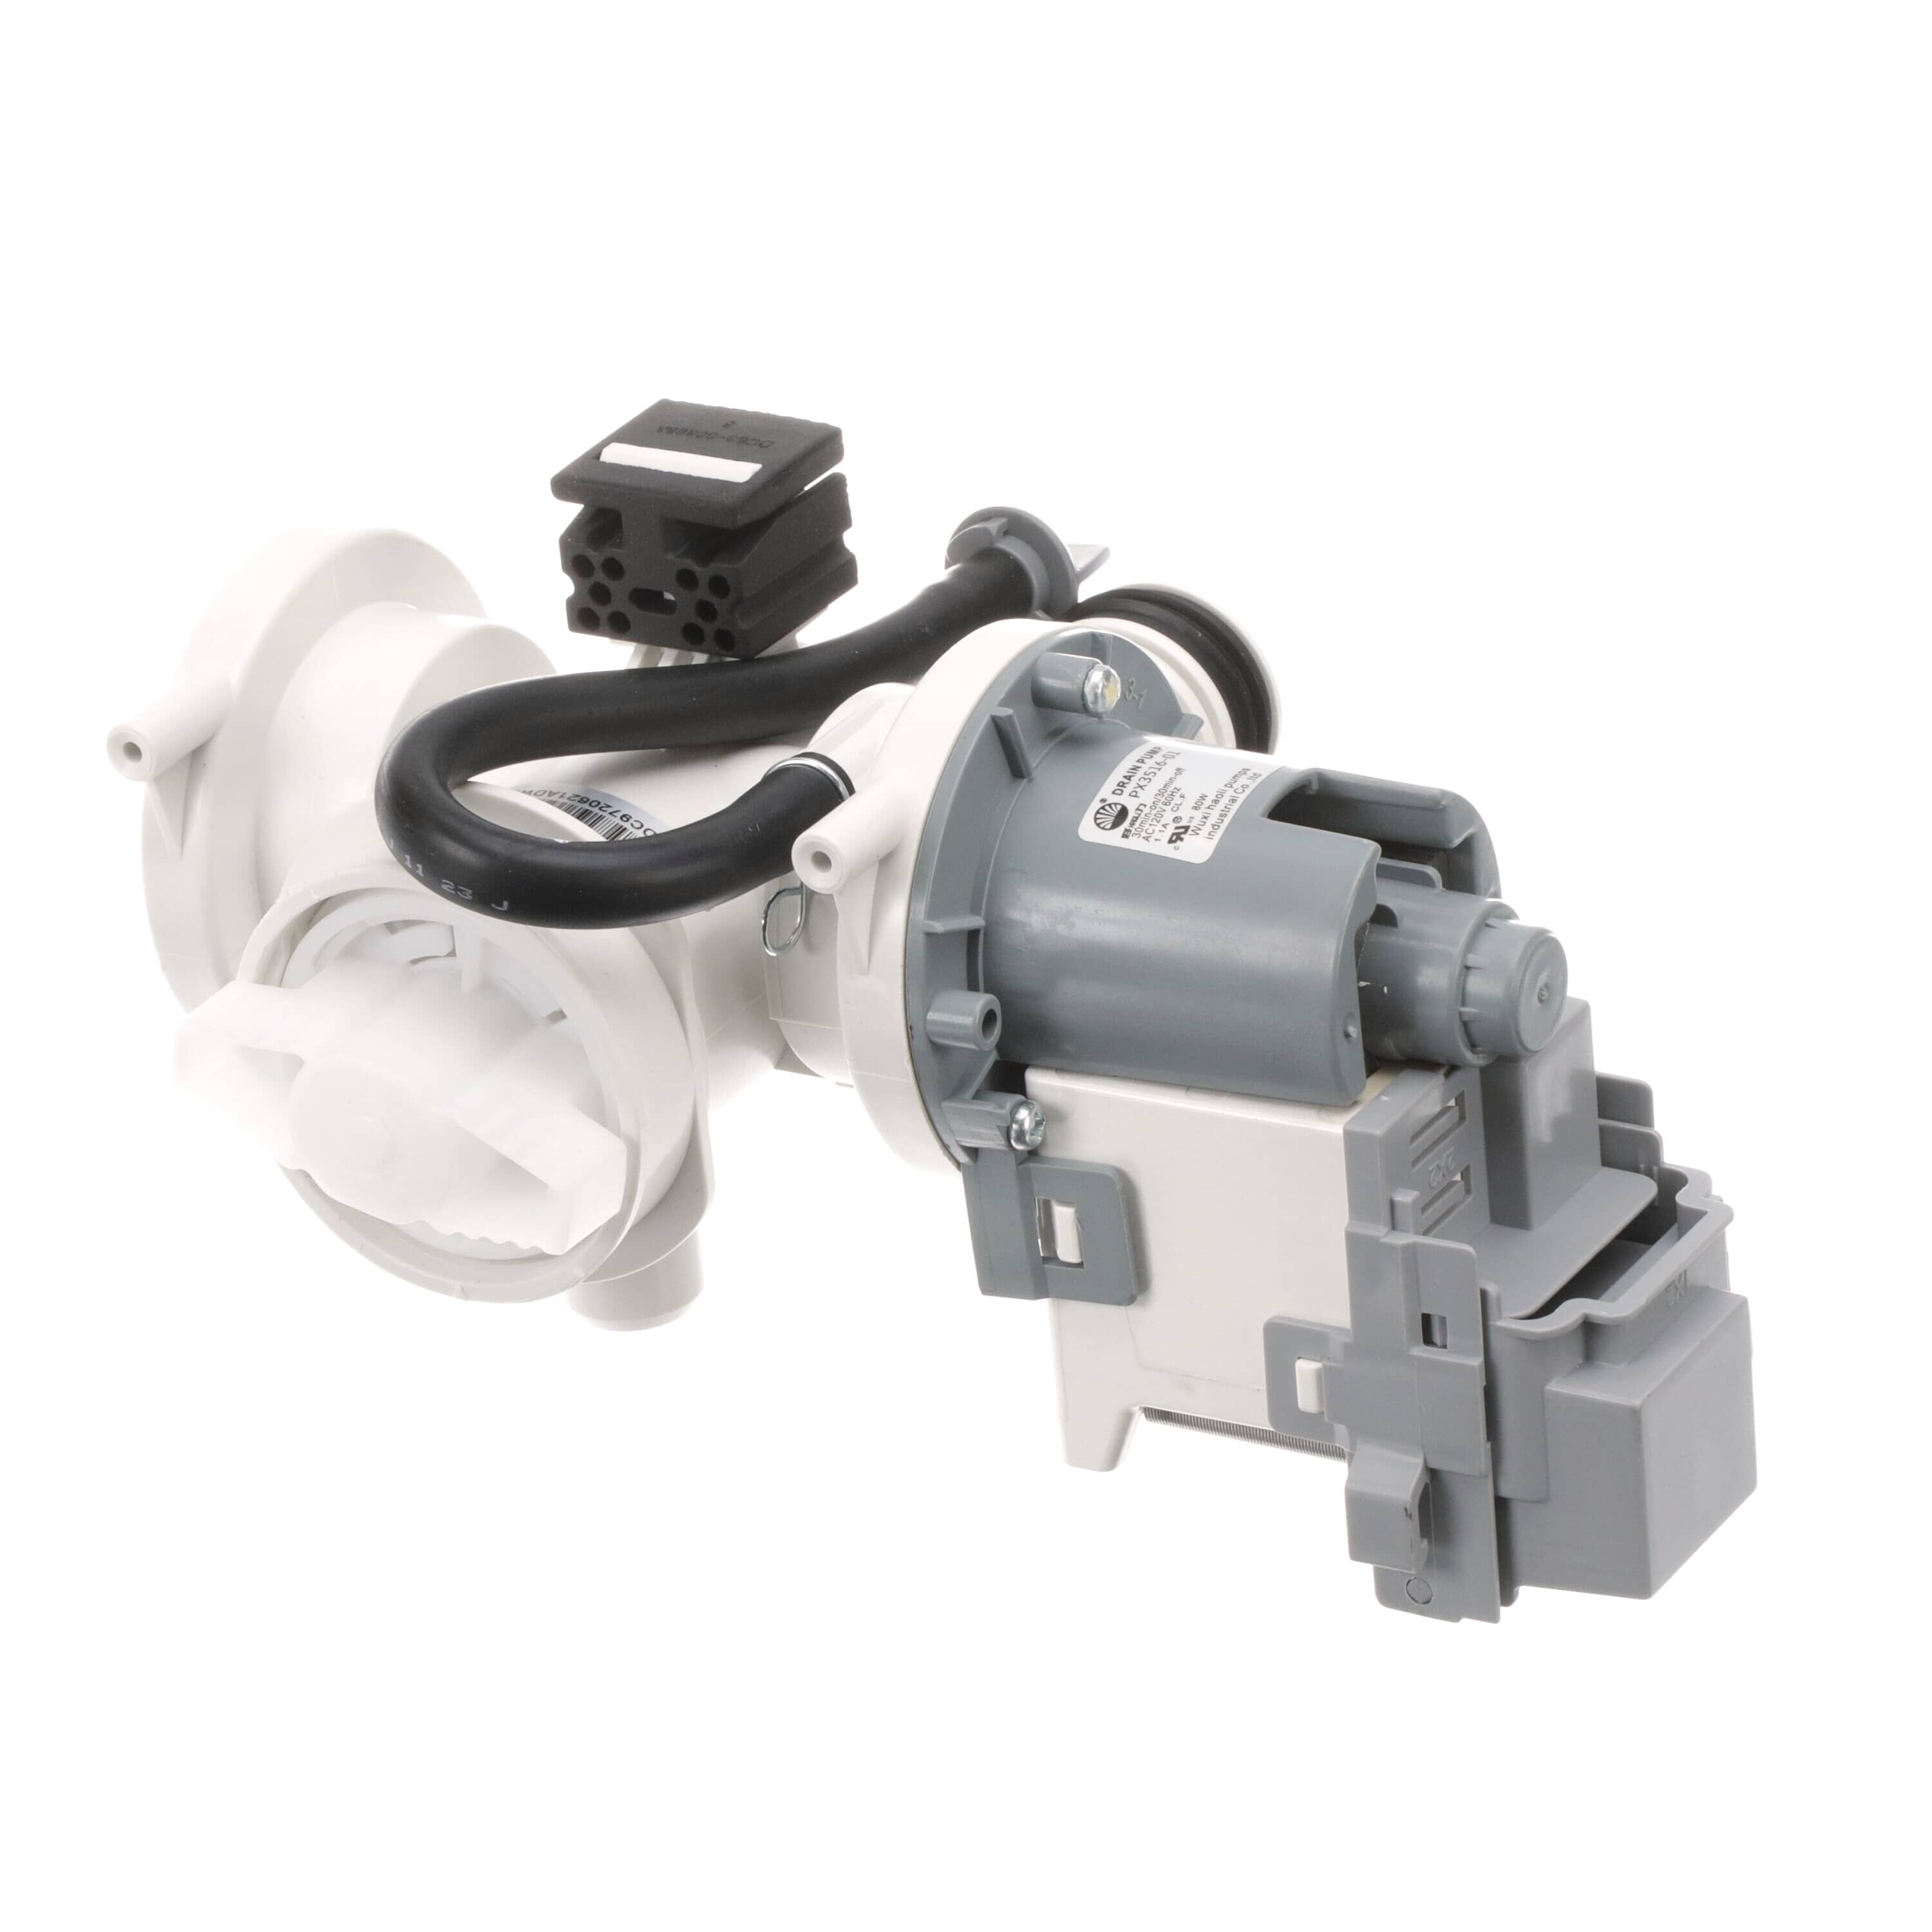 DC97-20621A Washer Drain Pump Assembly